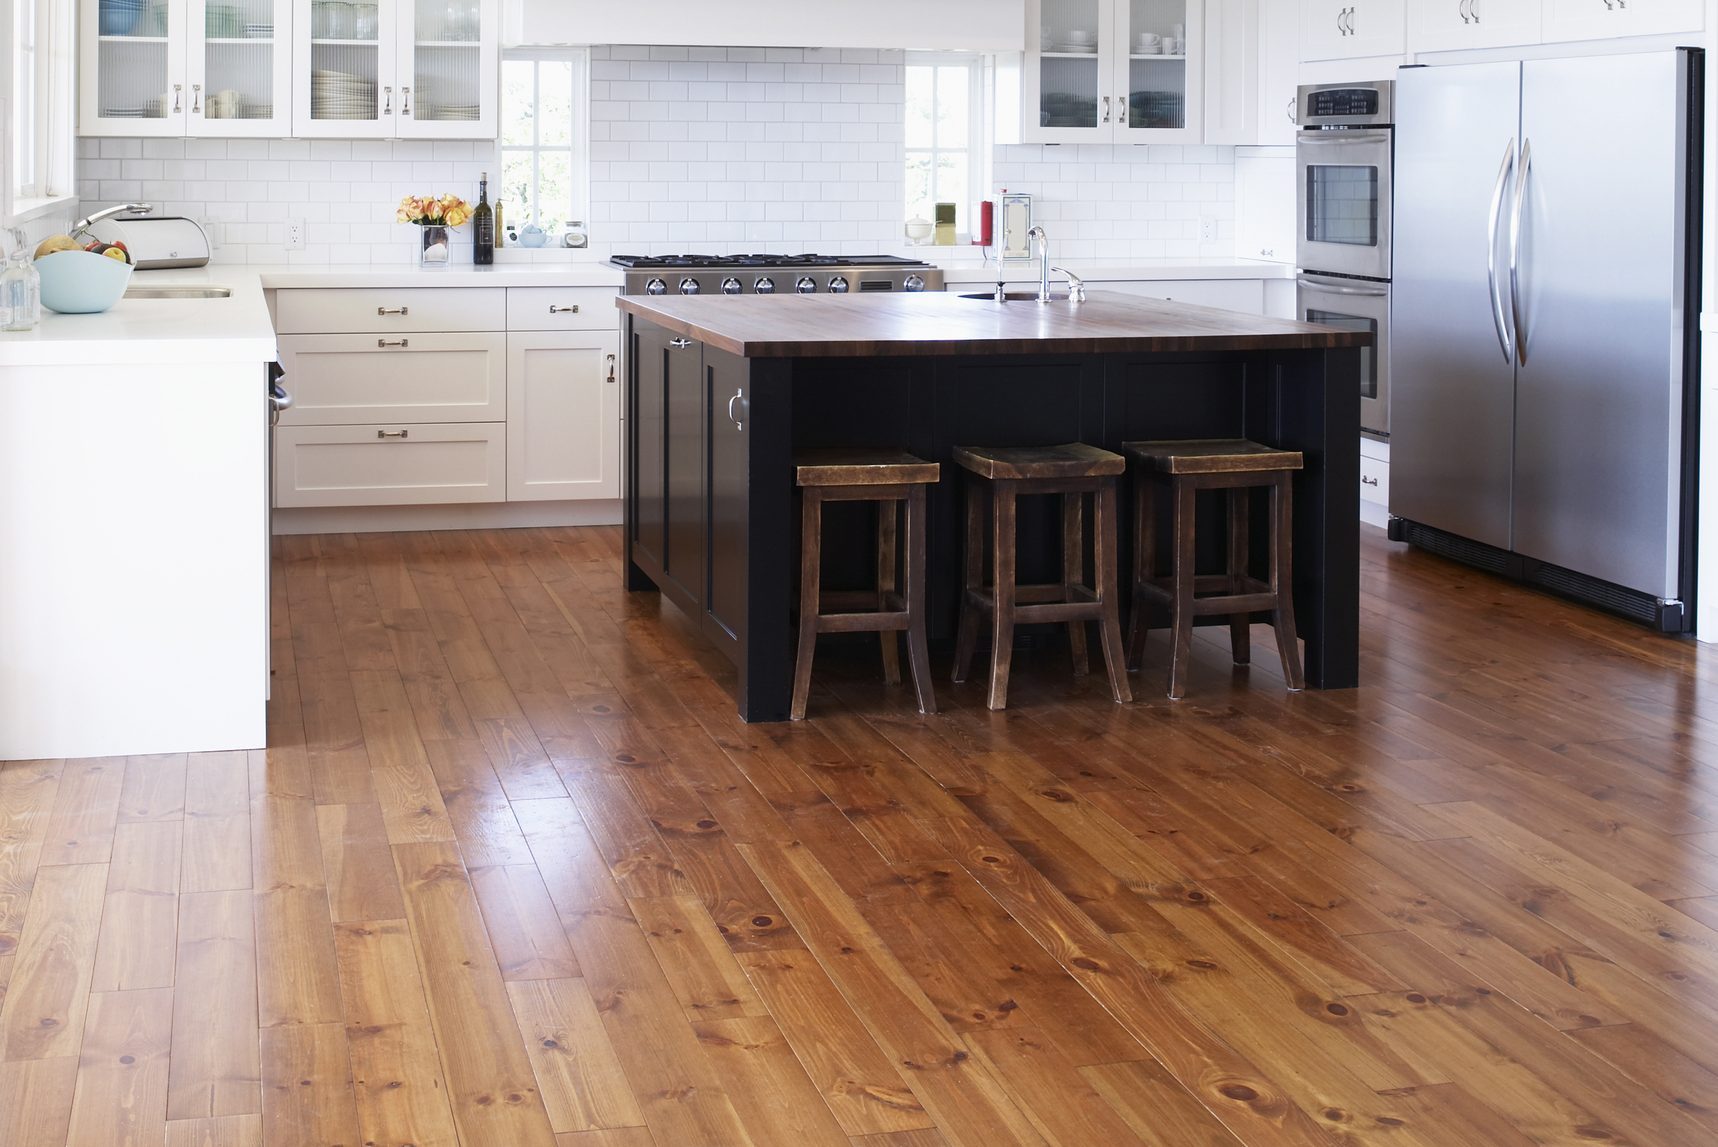 Modern Cork Flooring: New Flooring Saves Your Home and Planet